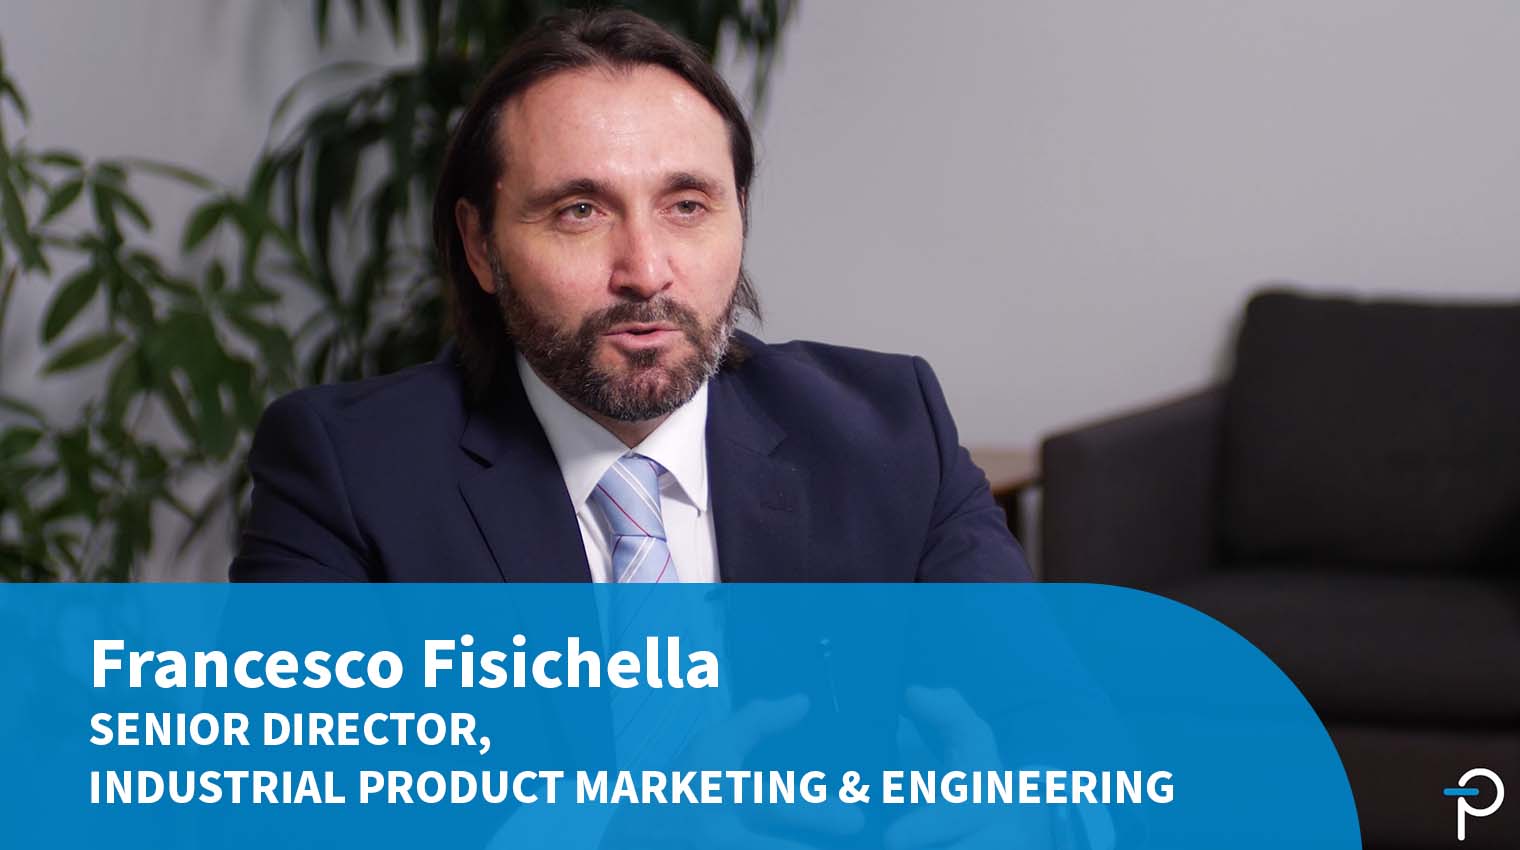 Francesco Fisichella - Director of Industrial Product Marketing and Engineering